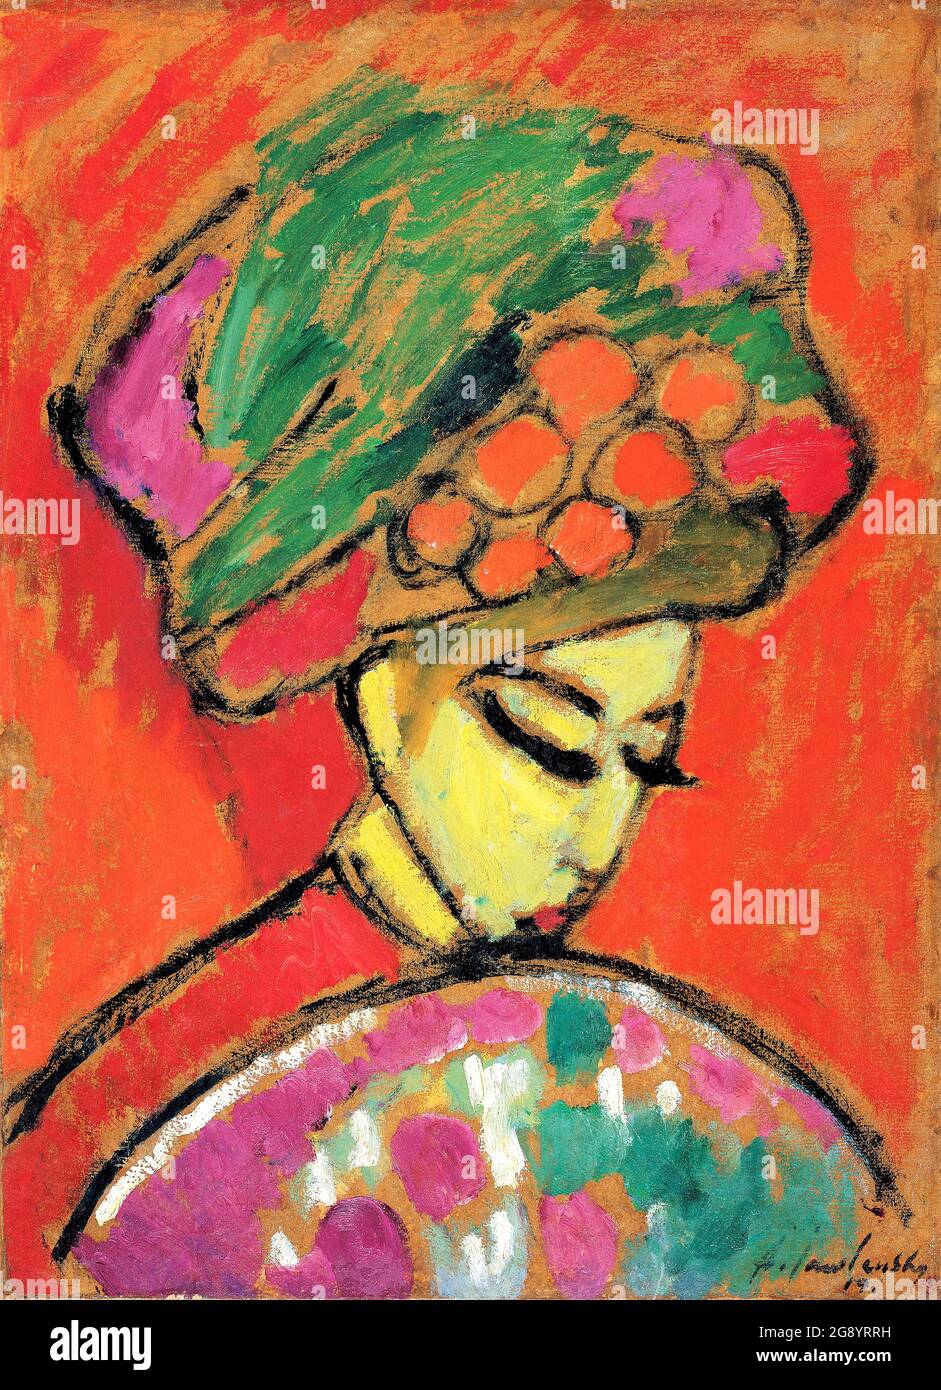 Alexej von Jawlensky. Painting entitled 'Young Girl with a Flowered Hat, 1910'  by Alexej Georgewitsch von Jawlensky (1864-1941), oil on cardboard, 1910 Stock Photo